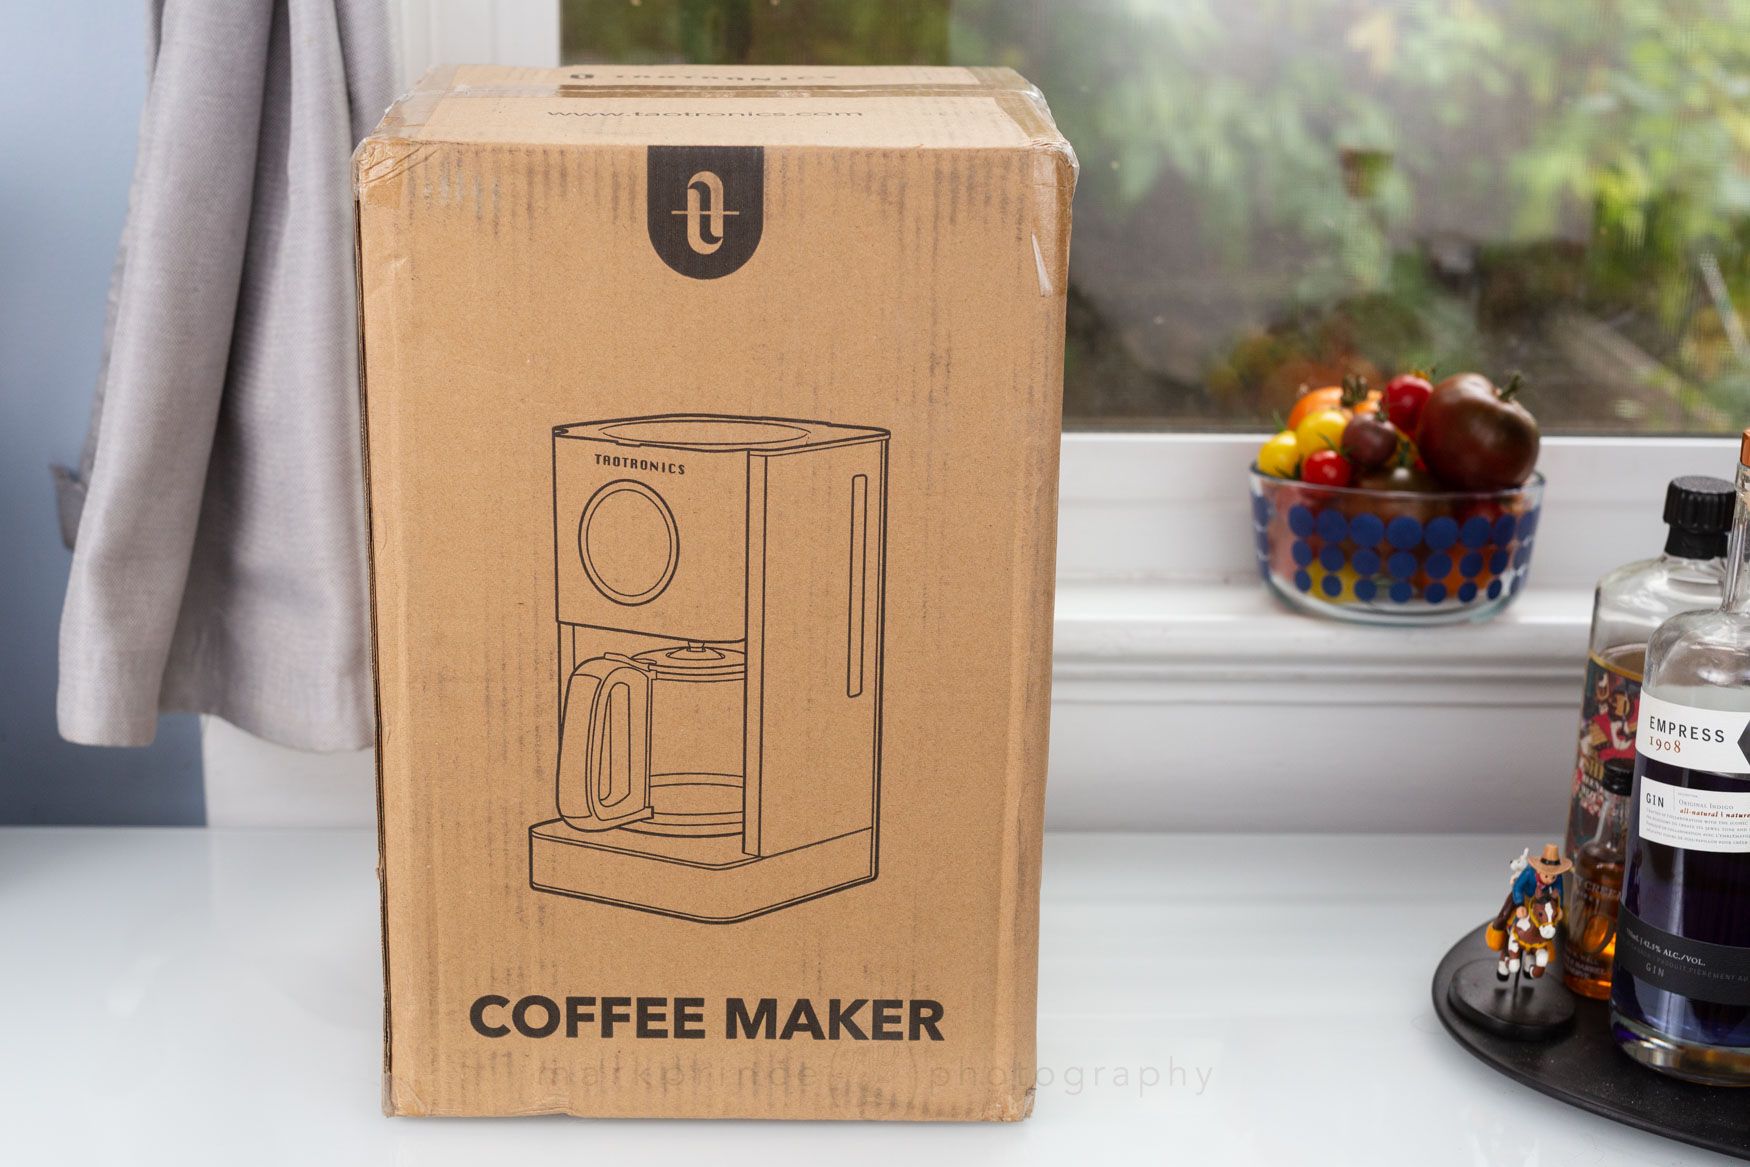 Vinci RDT Coffee Maker - How To Unbox, Assemble, Use, Clean & Troubleshoot  